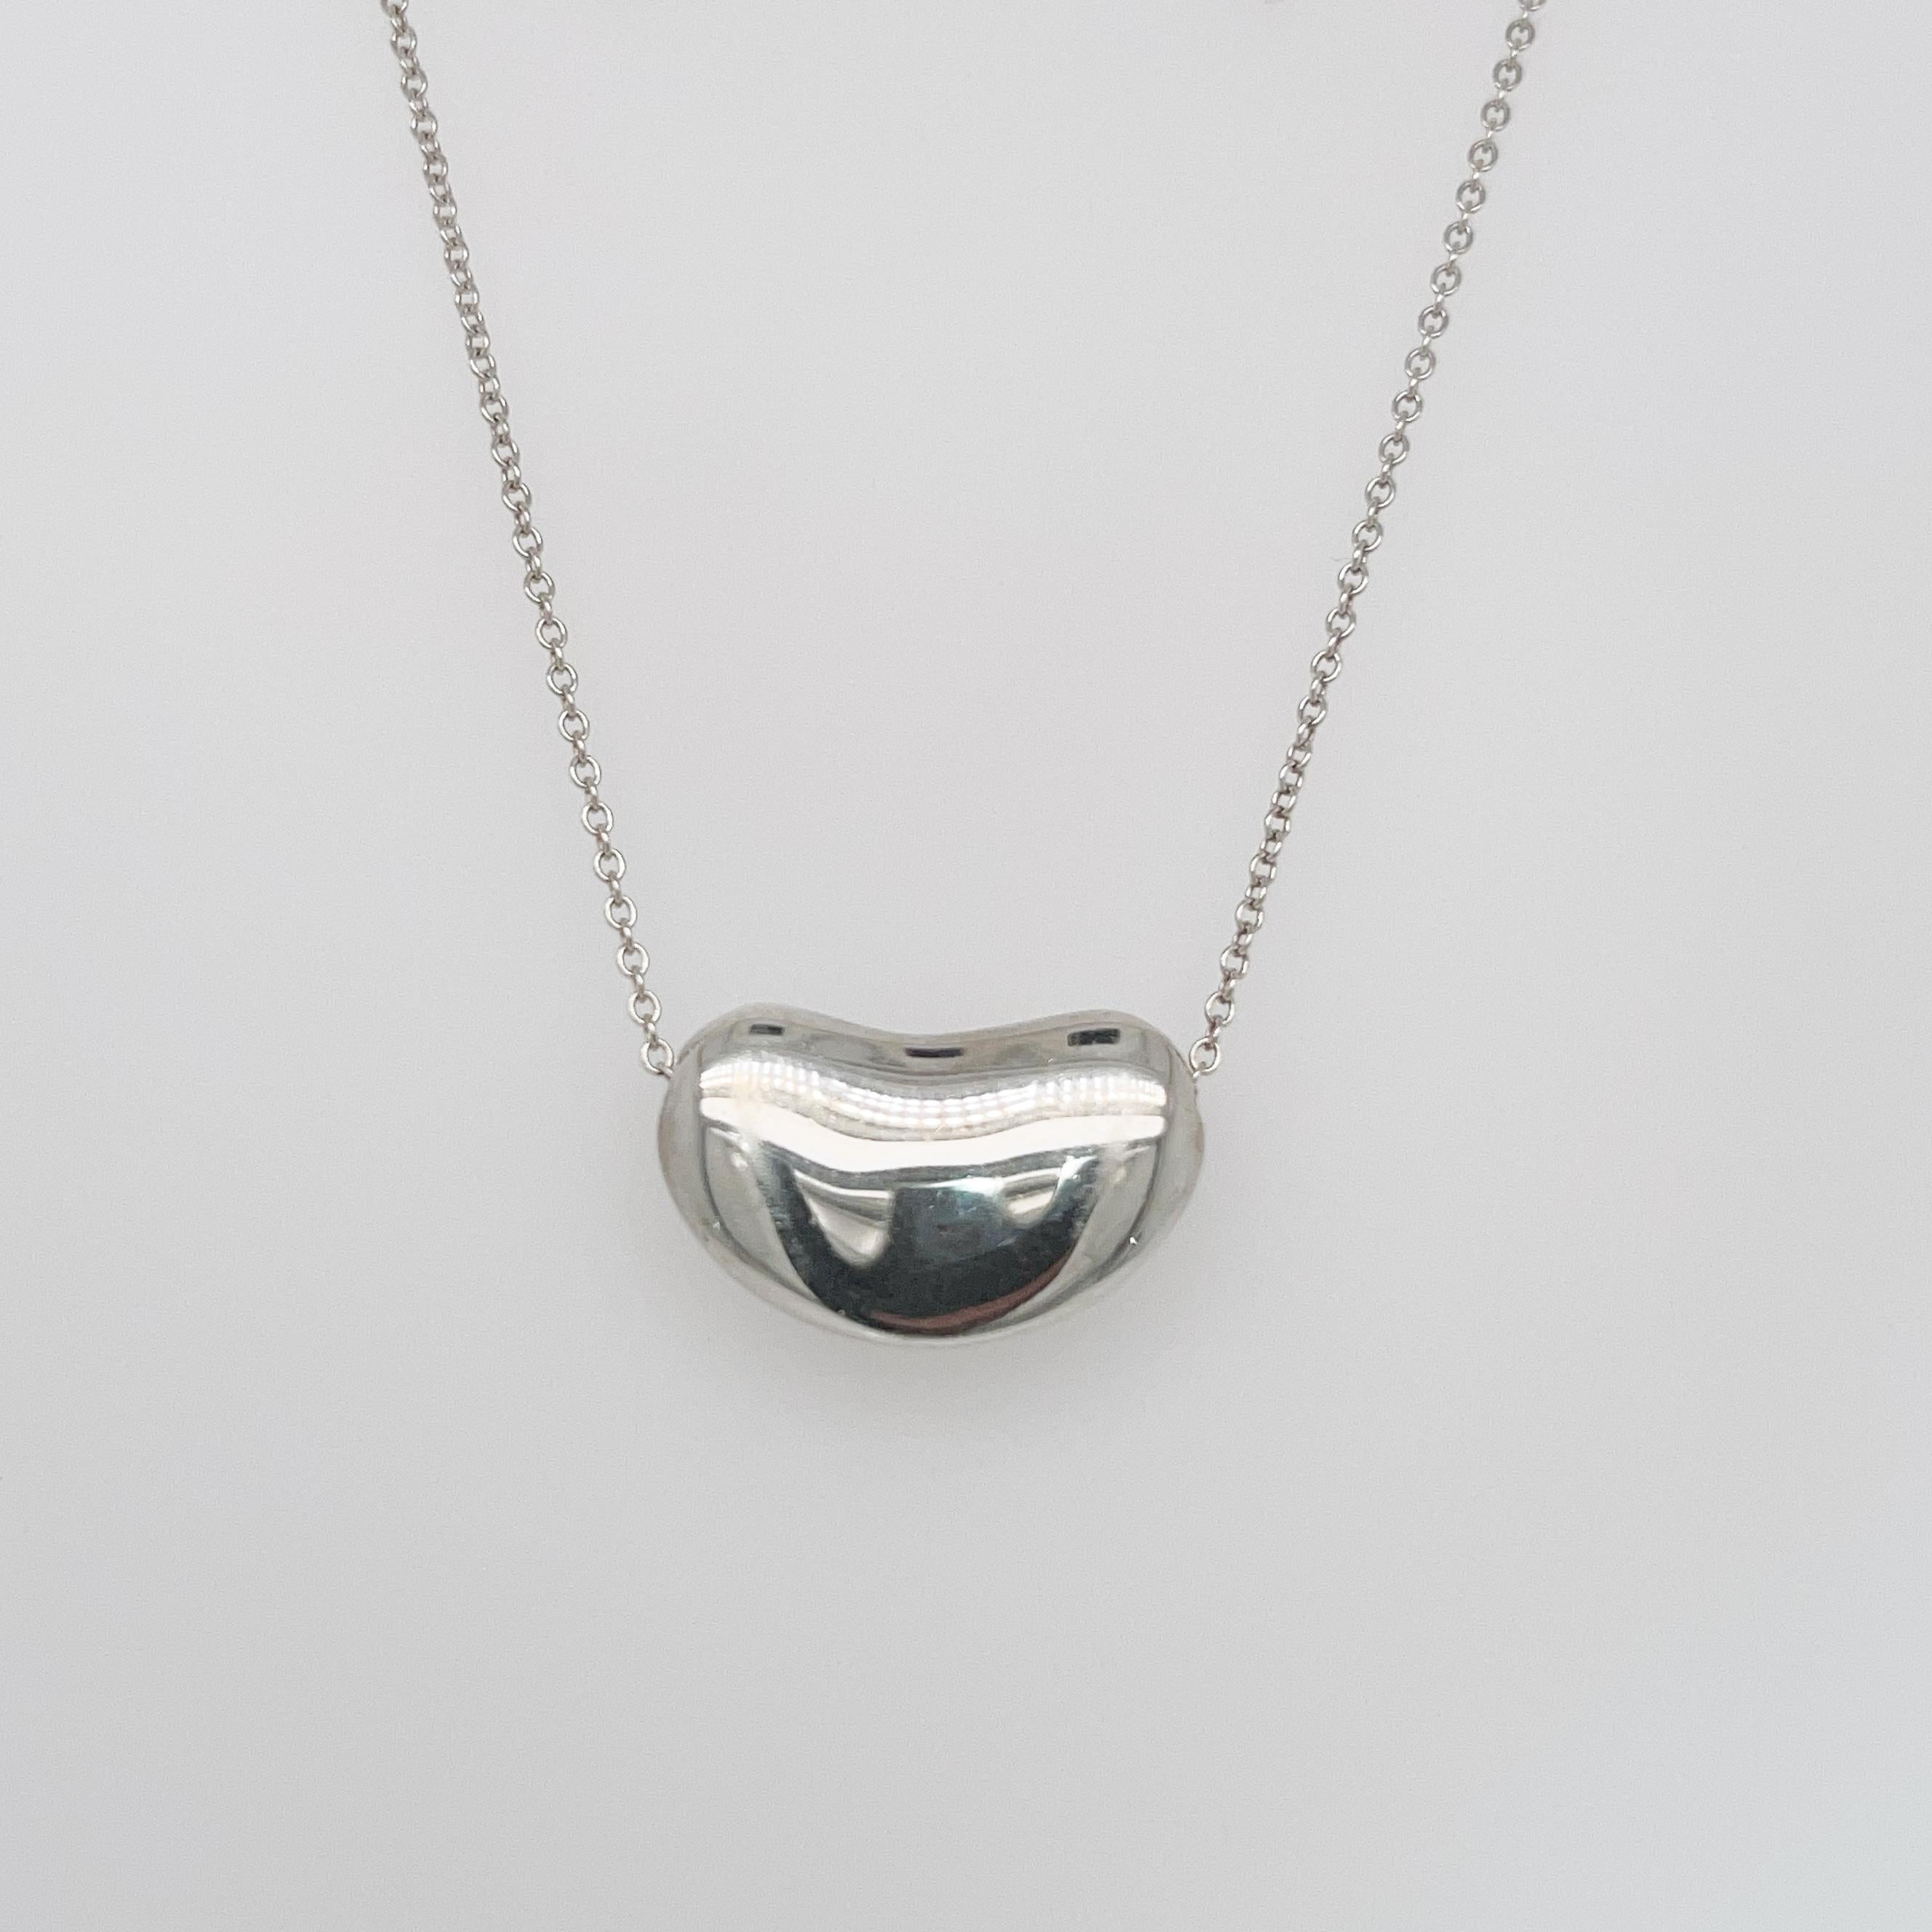 A fine Tiffany & Co. Bean necklace.

Designed by Elsa Peretti.

In sterling silver.

Together with a signed Tiffany & Co. chain.

Simply great Tiffany design!

Date:
20th Century

Overall Condition:
It is in overall good, as-pictured, used estate